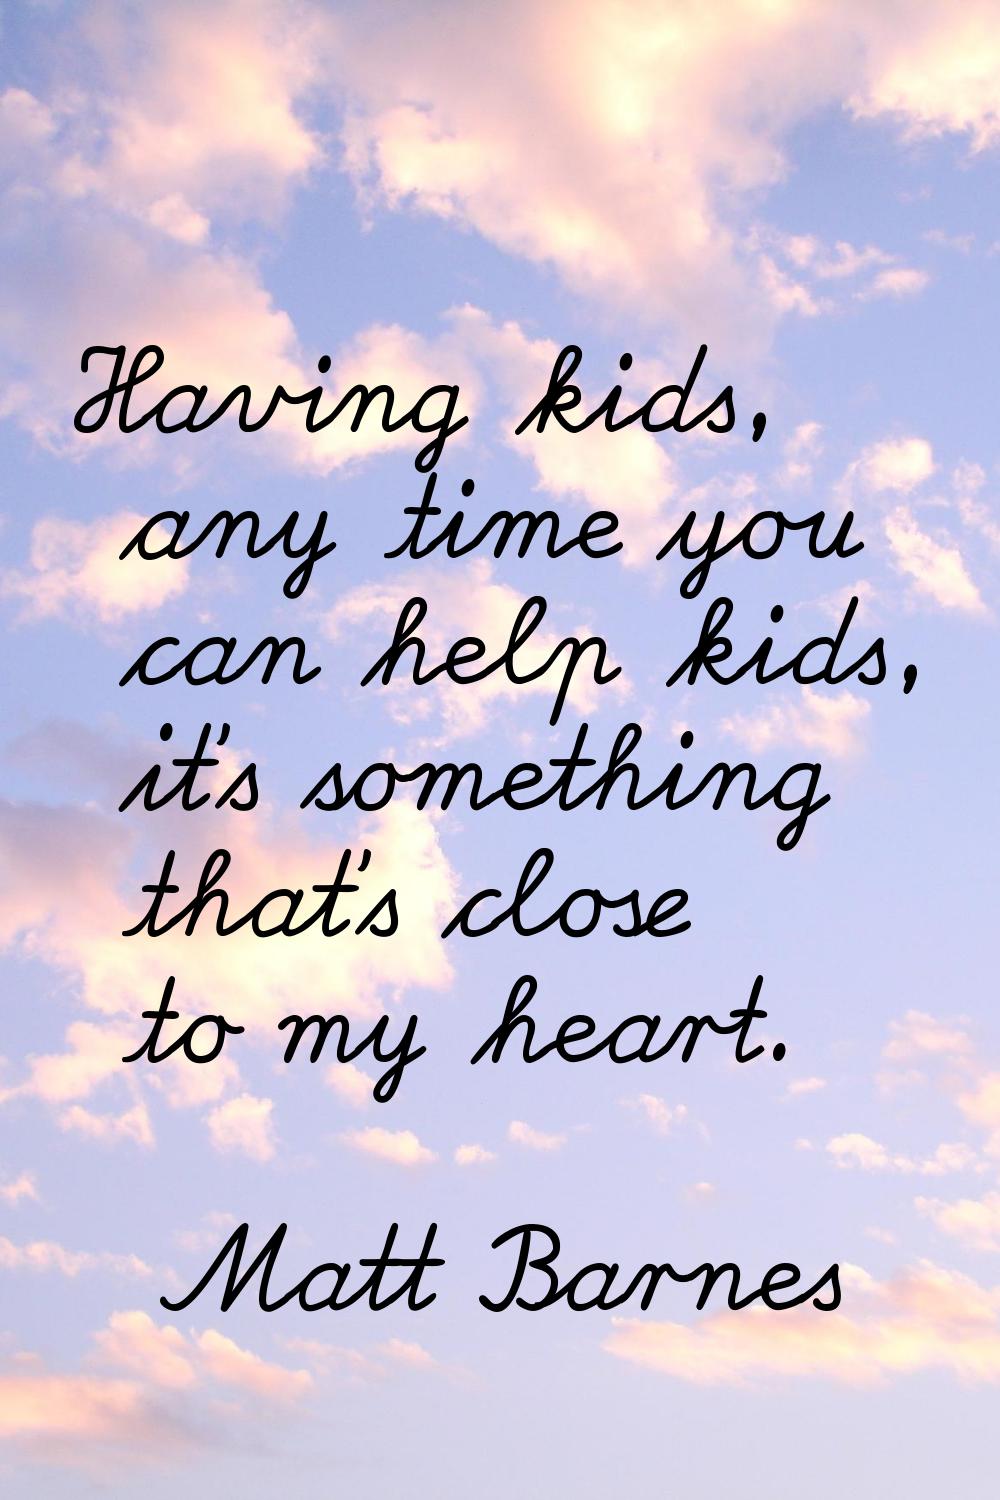 Having kids, any time you can help kids, it's something that's close to my heart.